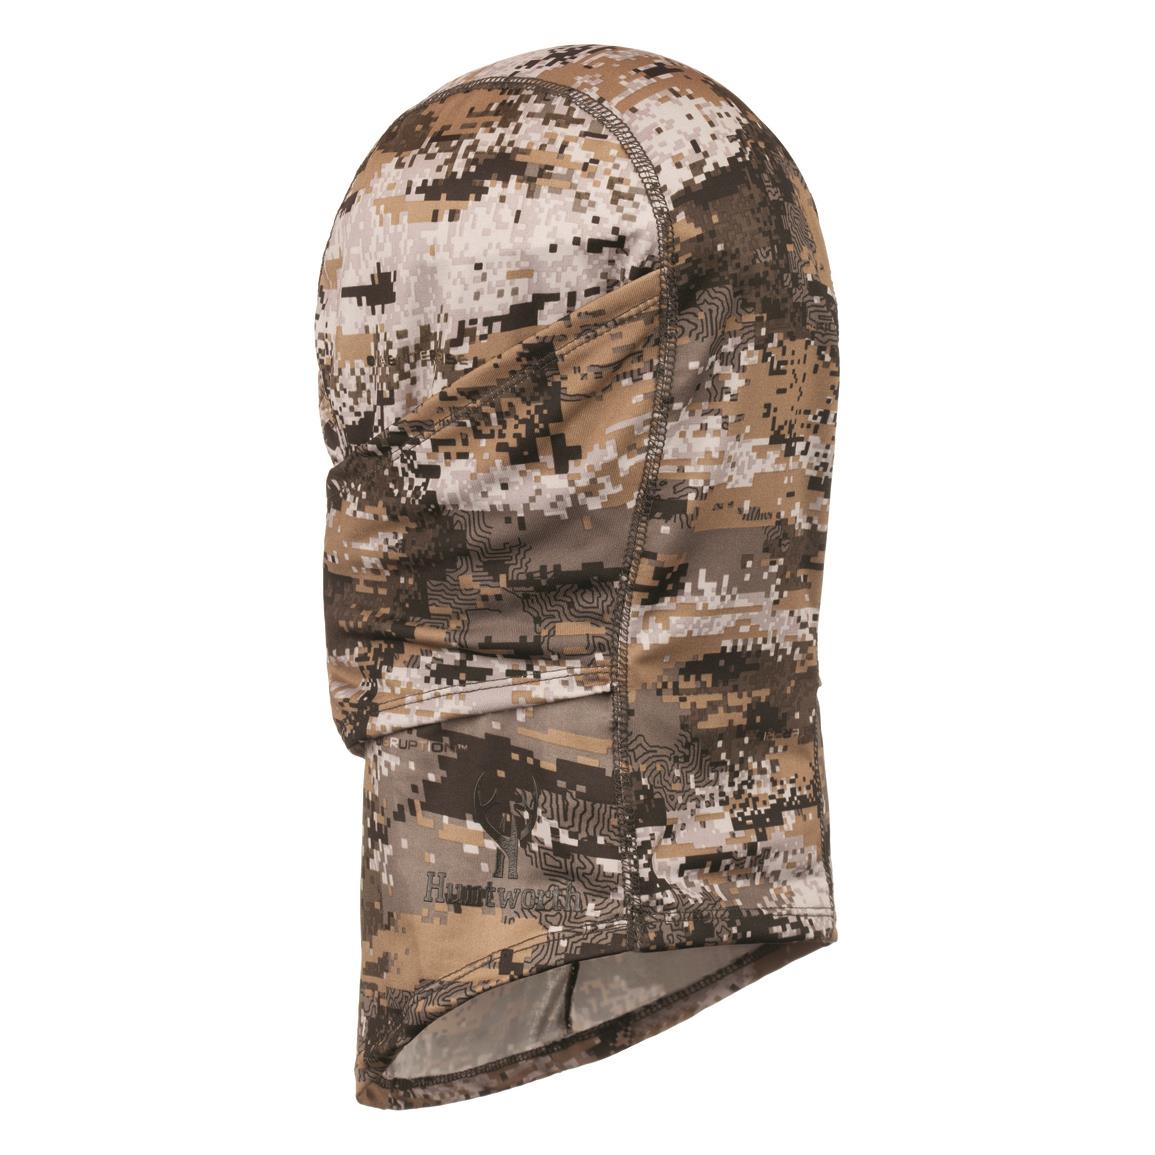 ScentLok BE:1 Headcover - 716605, Hats & Caps at Sportsman's Guide